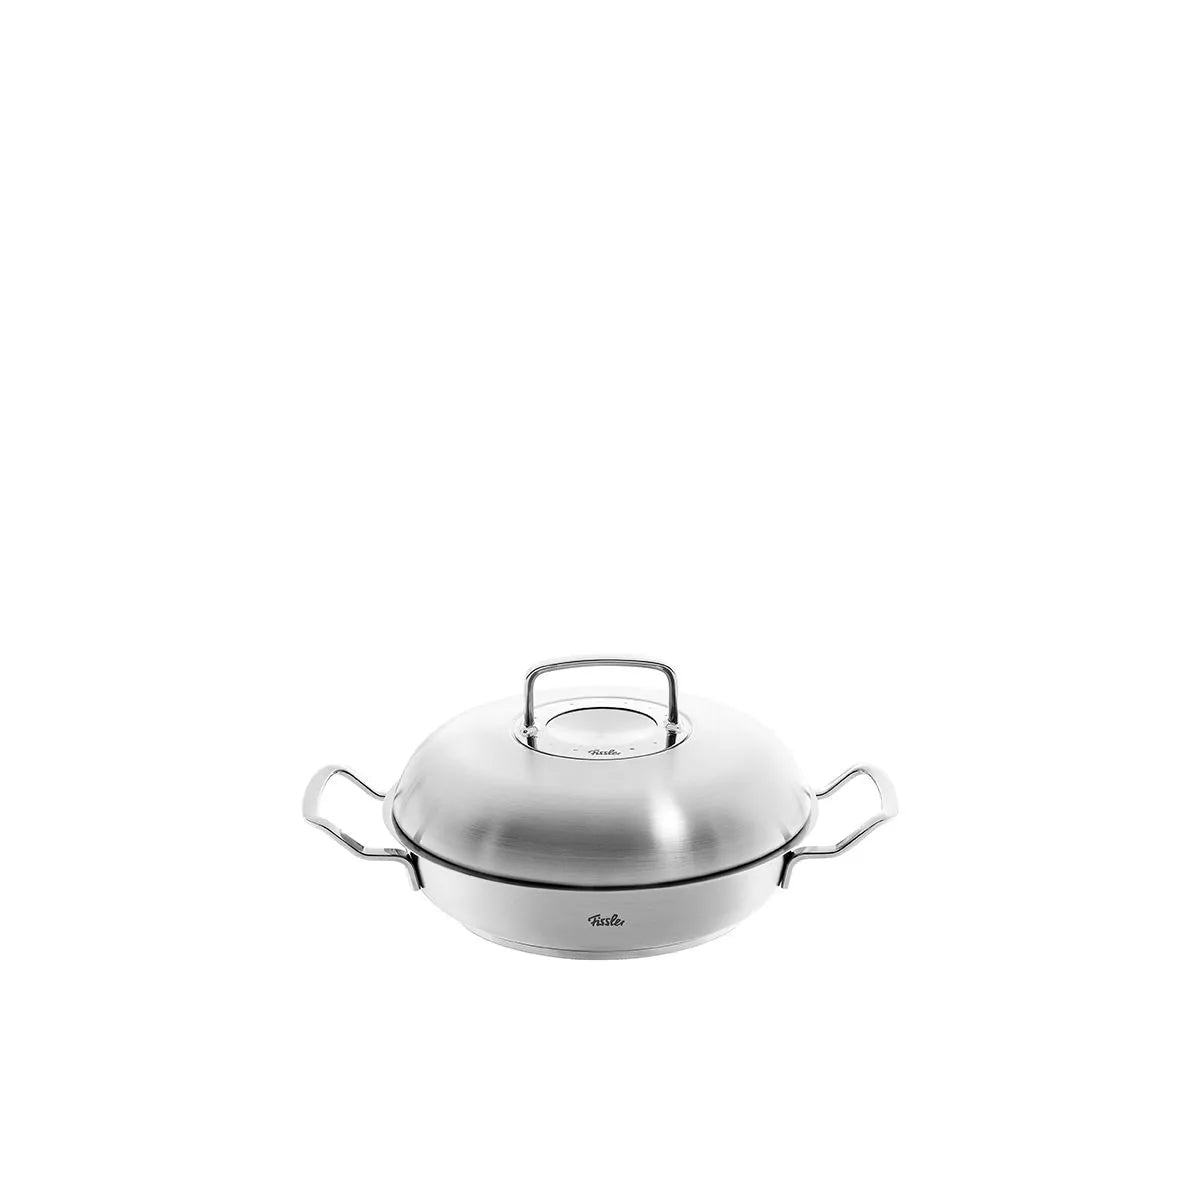 Fissler Original-Profi Collection® Serving Pan with High Dome Lid (9.5")